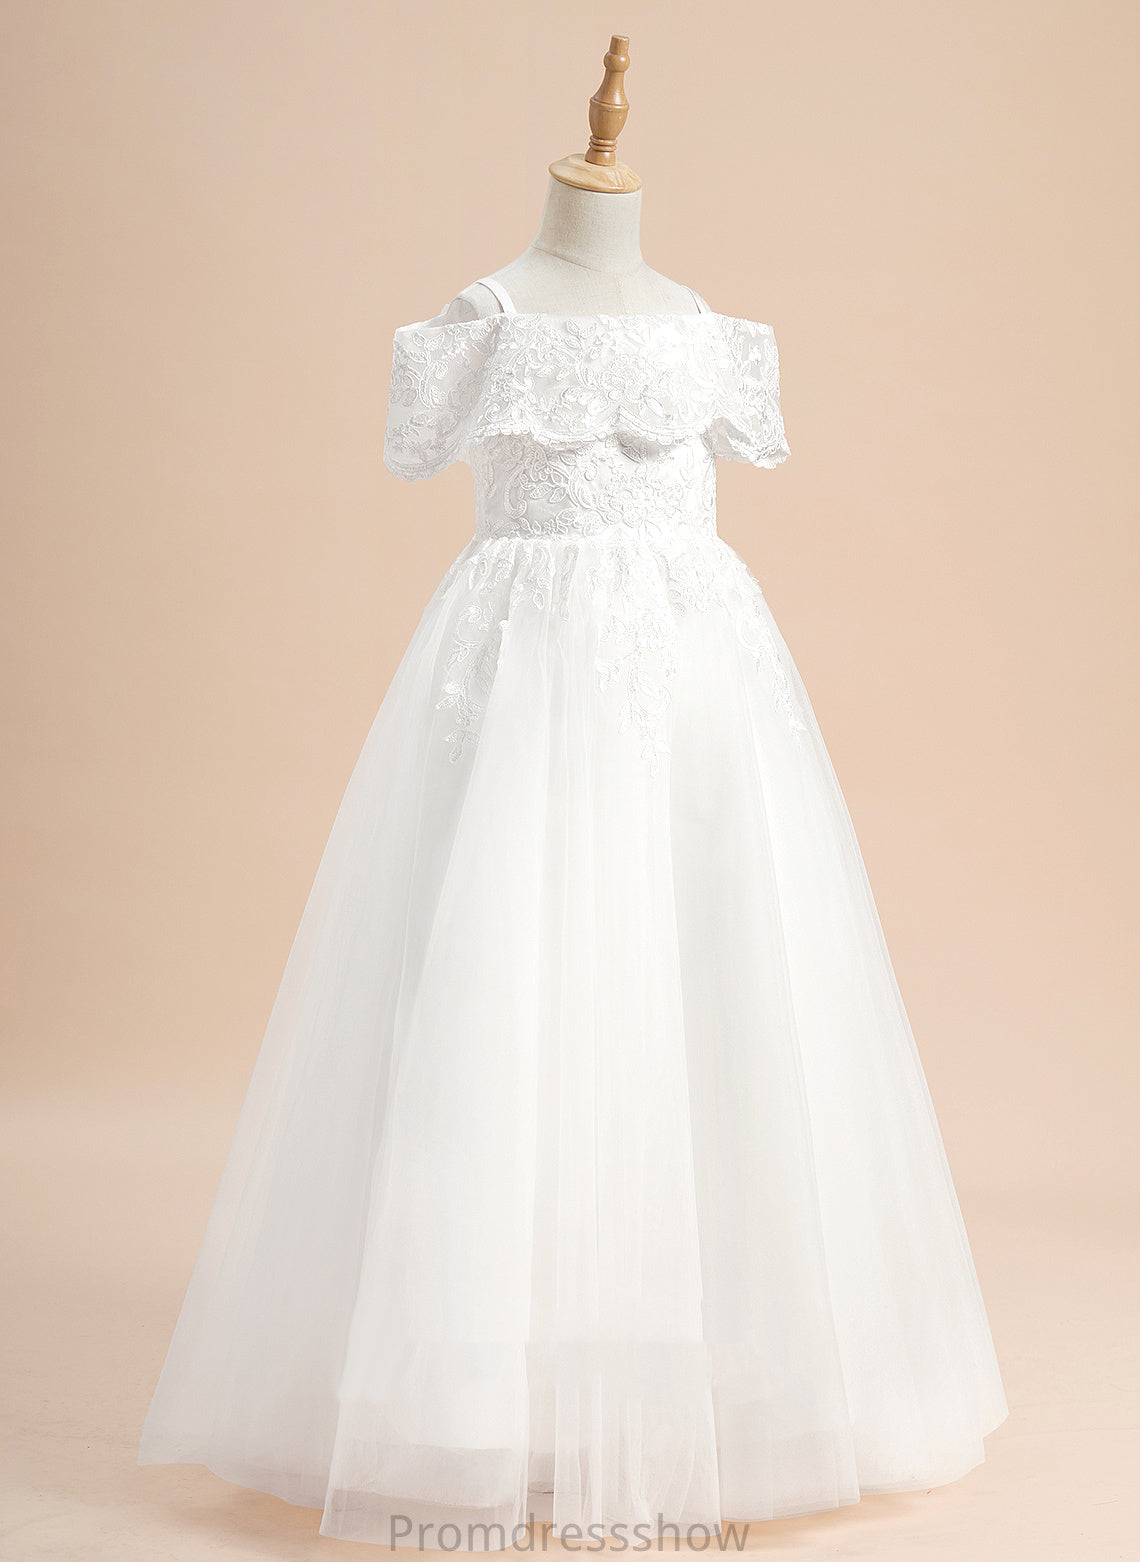 Flower Girl Dresses Dress Floor-length Off-the-Shoulder Ball-Gown/Princess Sleeves Bailey Girl Lace Tulle Flower Short - With